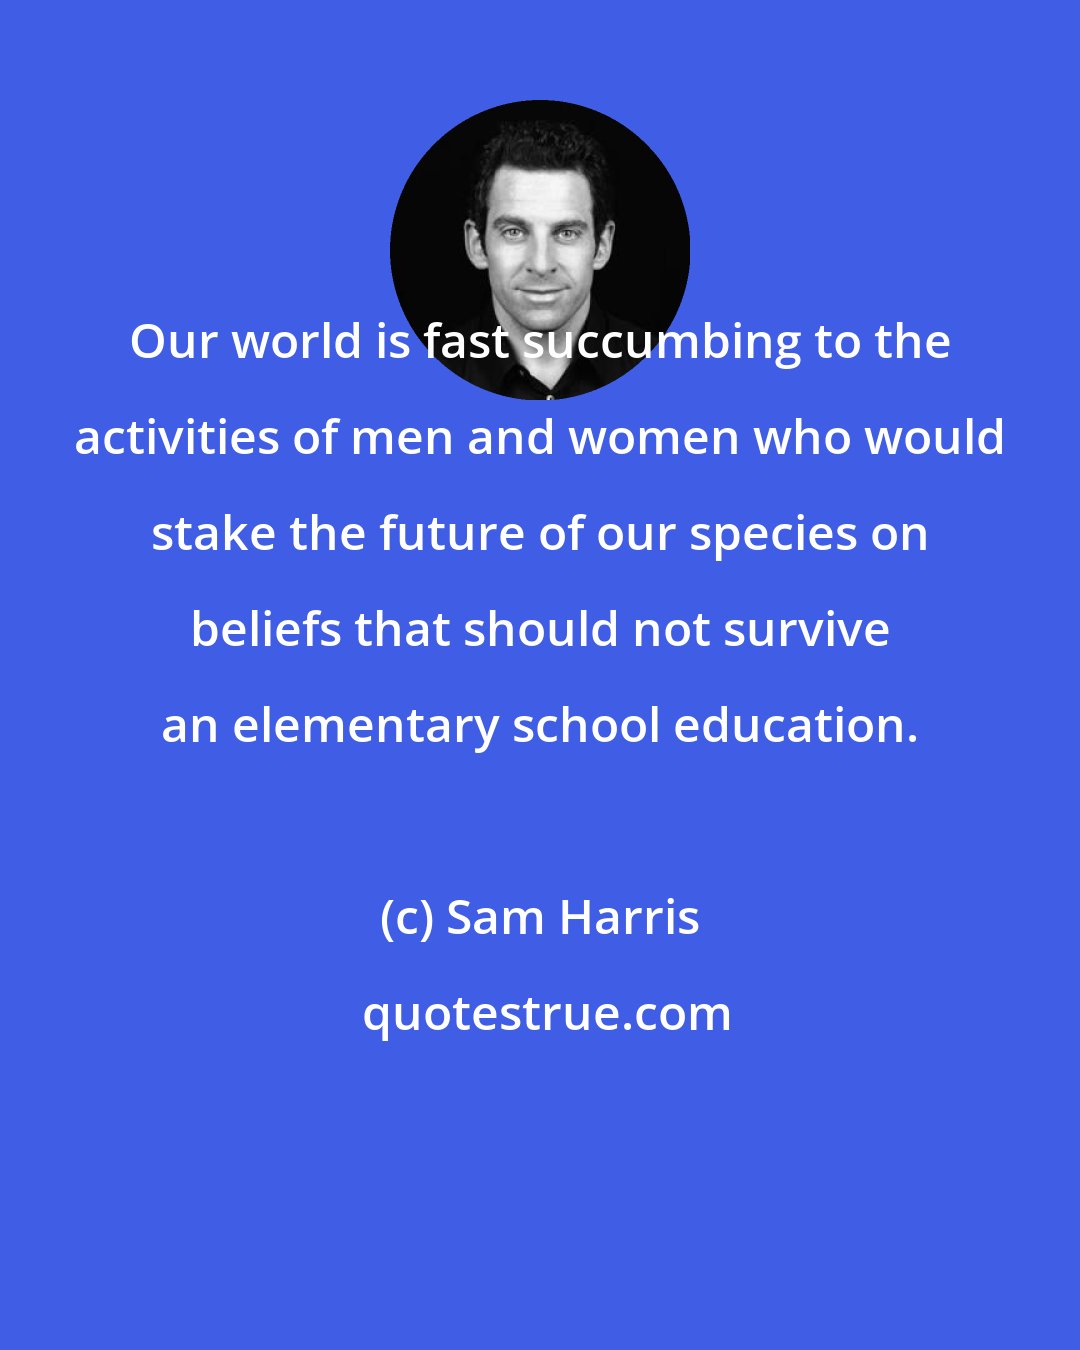 Sam Harris: Our world is fast succumbing to the activities of men and women who would stake the future of our species on beliefs that should not survive an elementary school education.